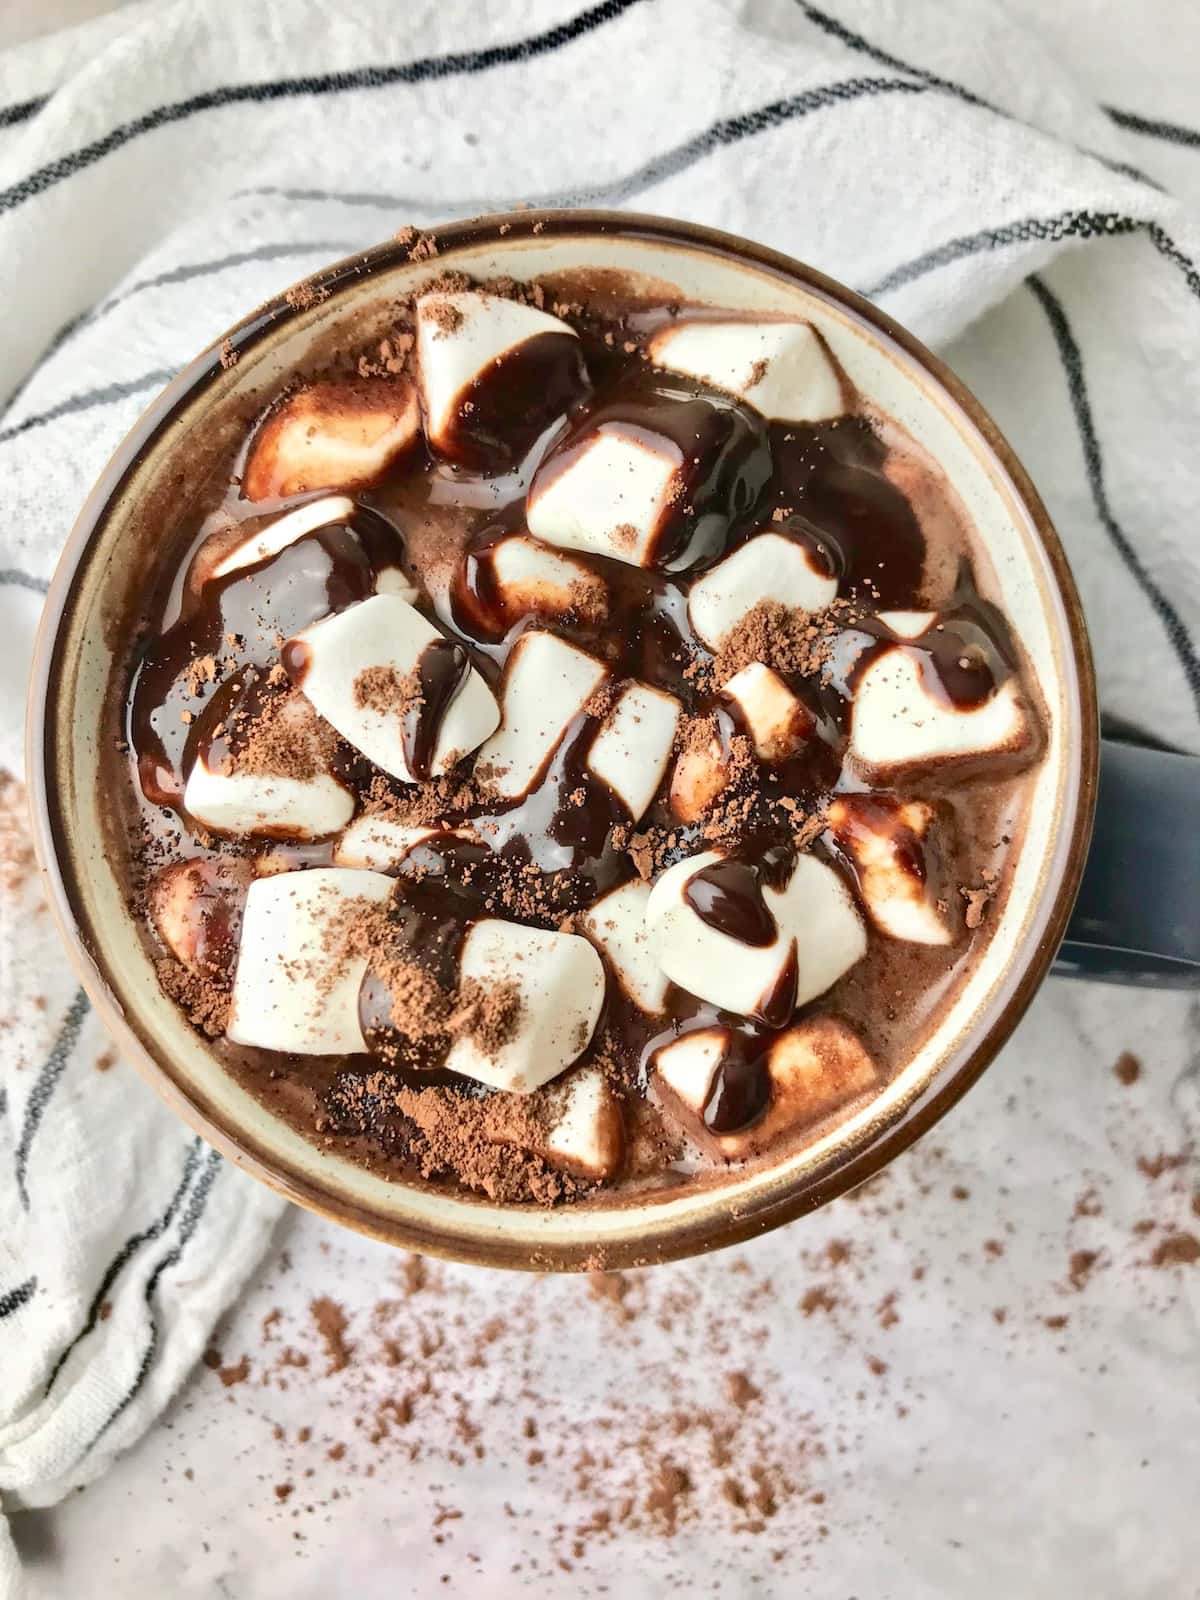 Overhead view of hot chocolate in a mug topped with marshmallows and chocolate sauce.